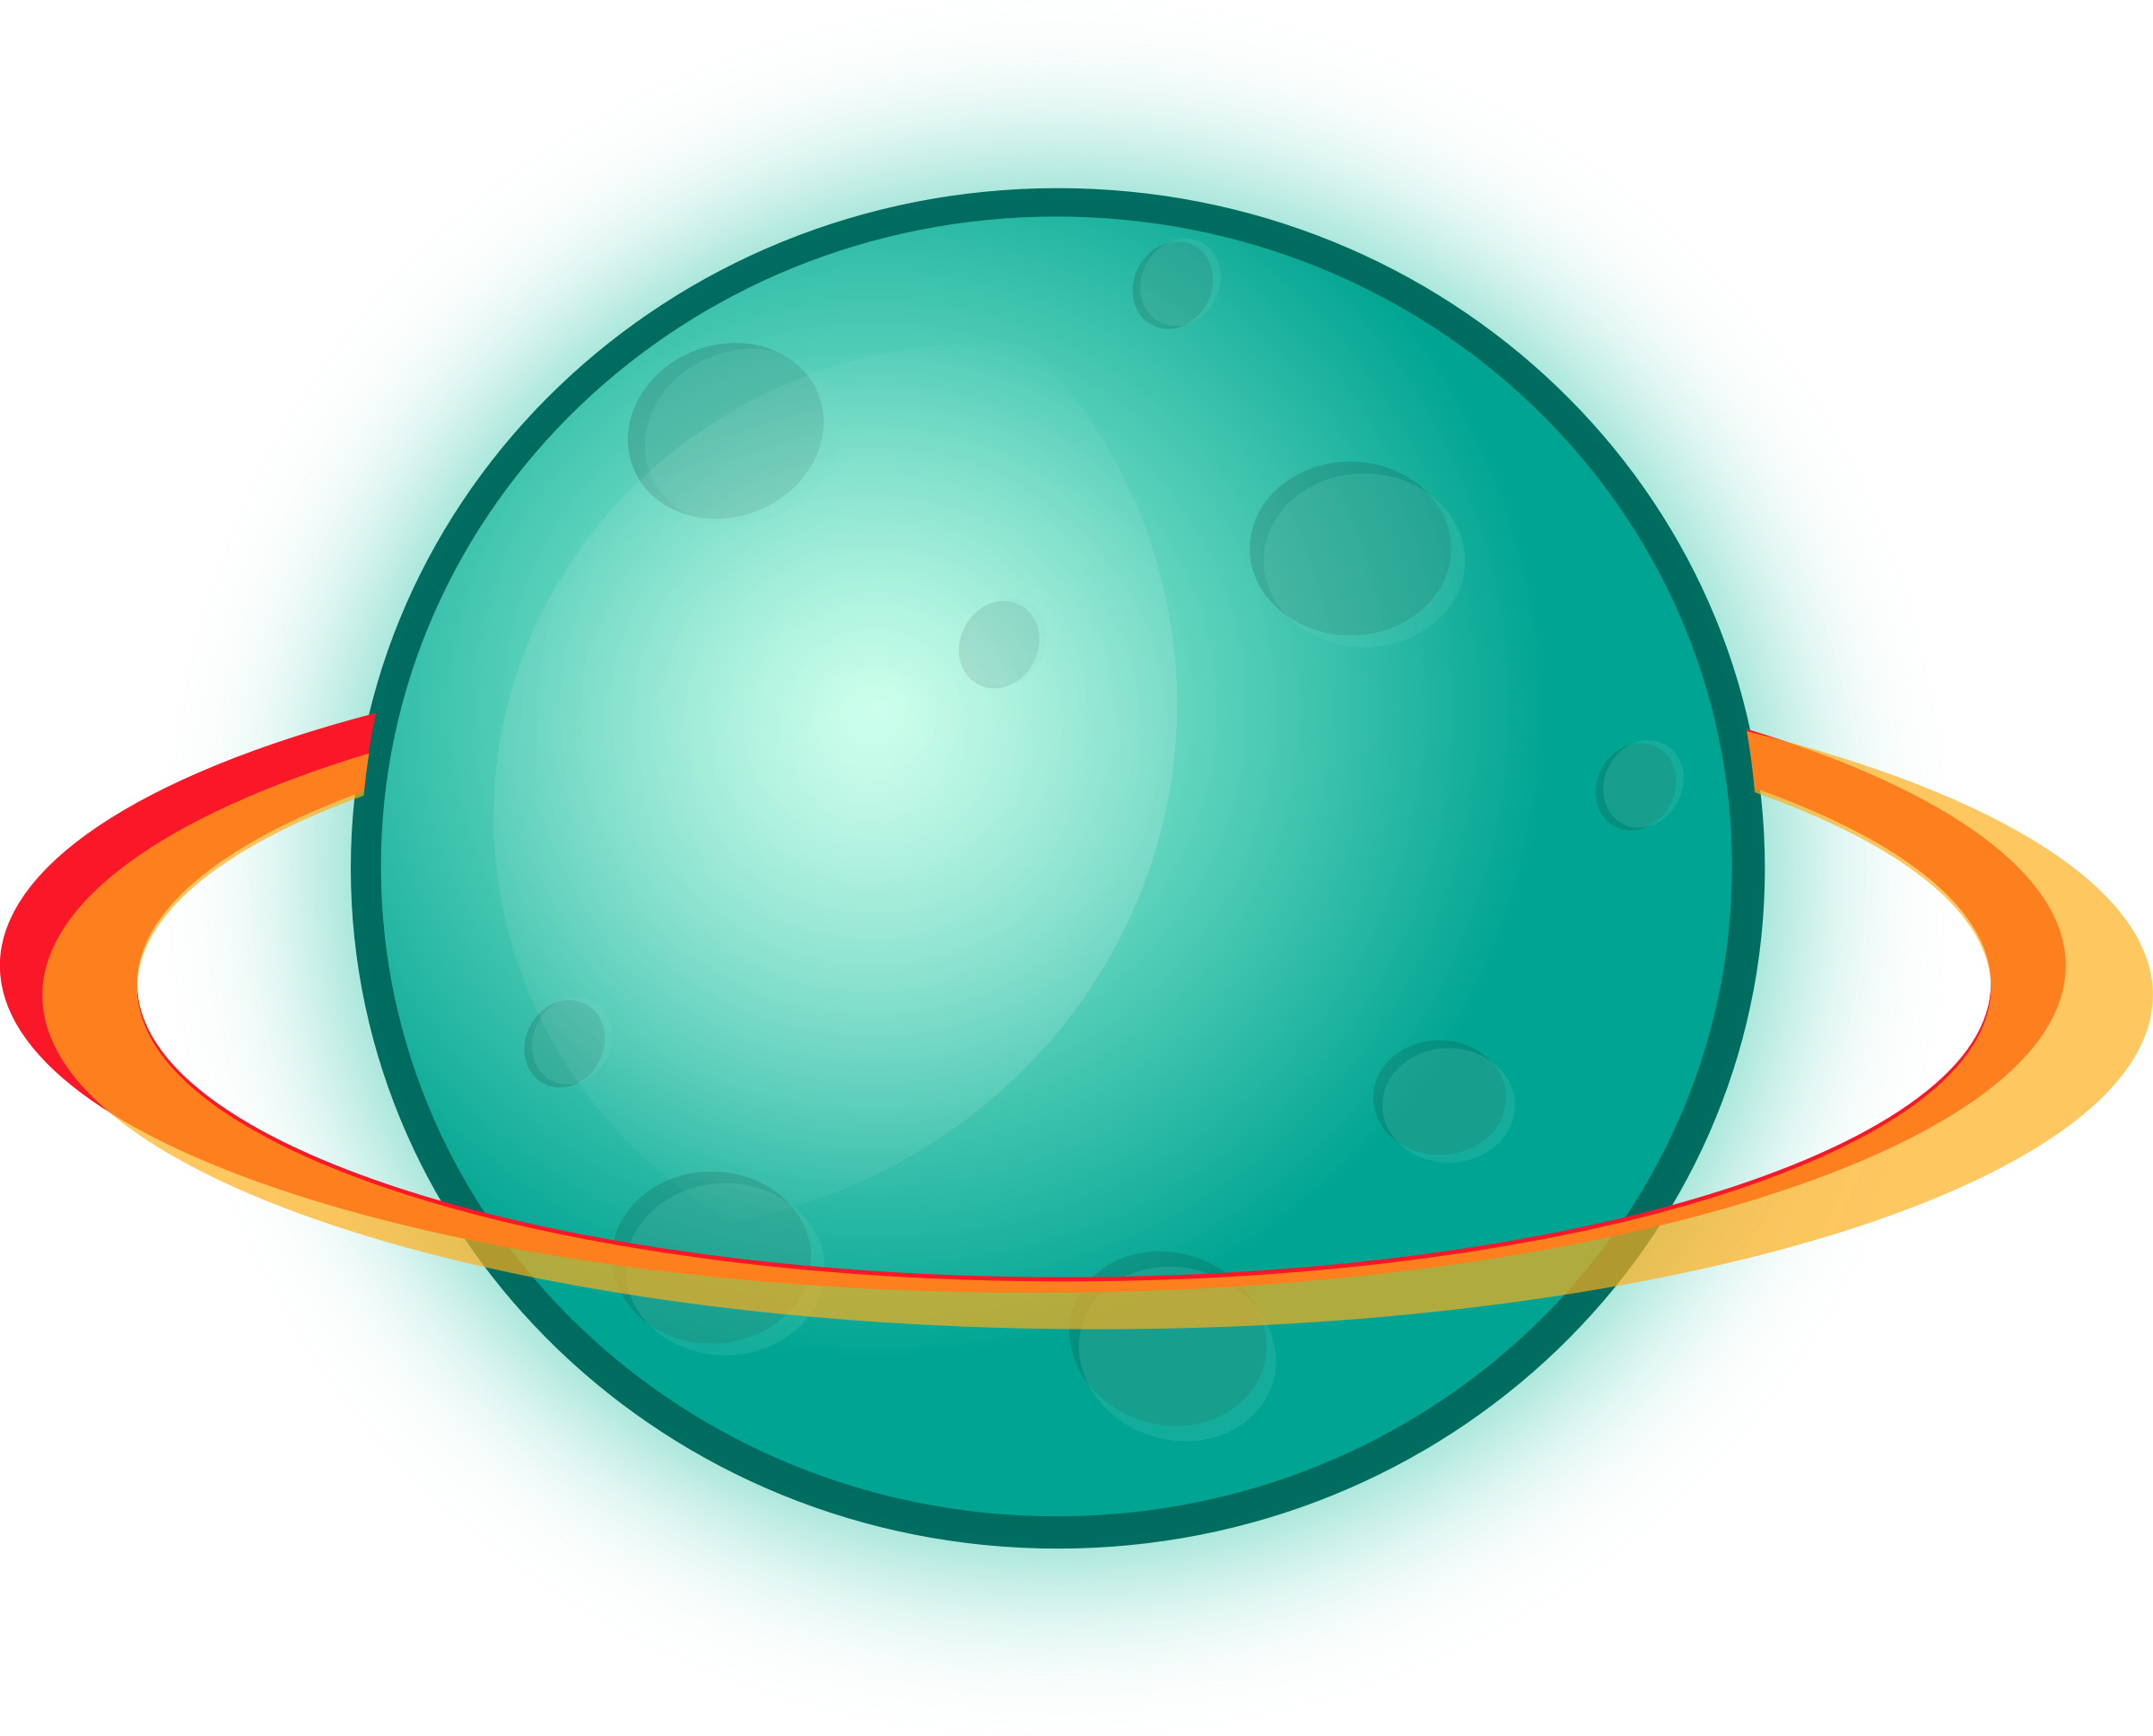 Clipart rocket planet. With rings by magnesus